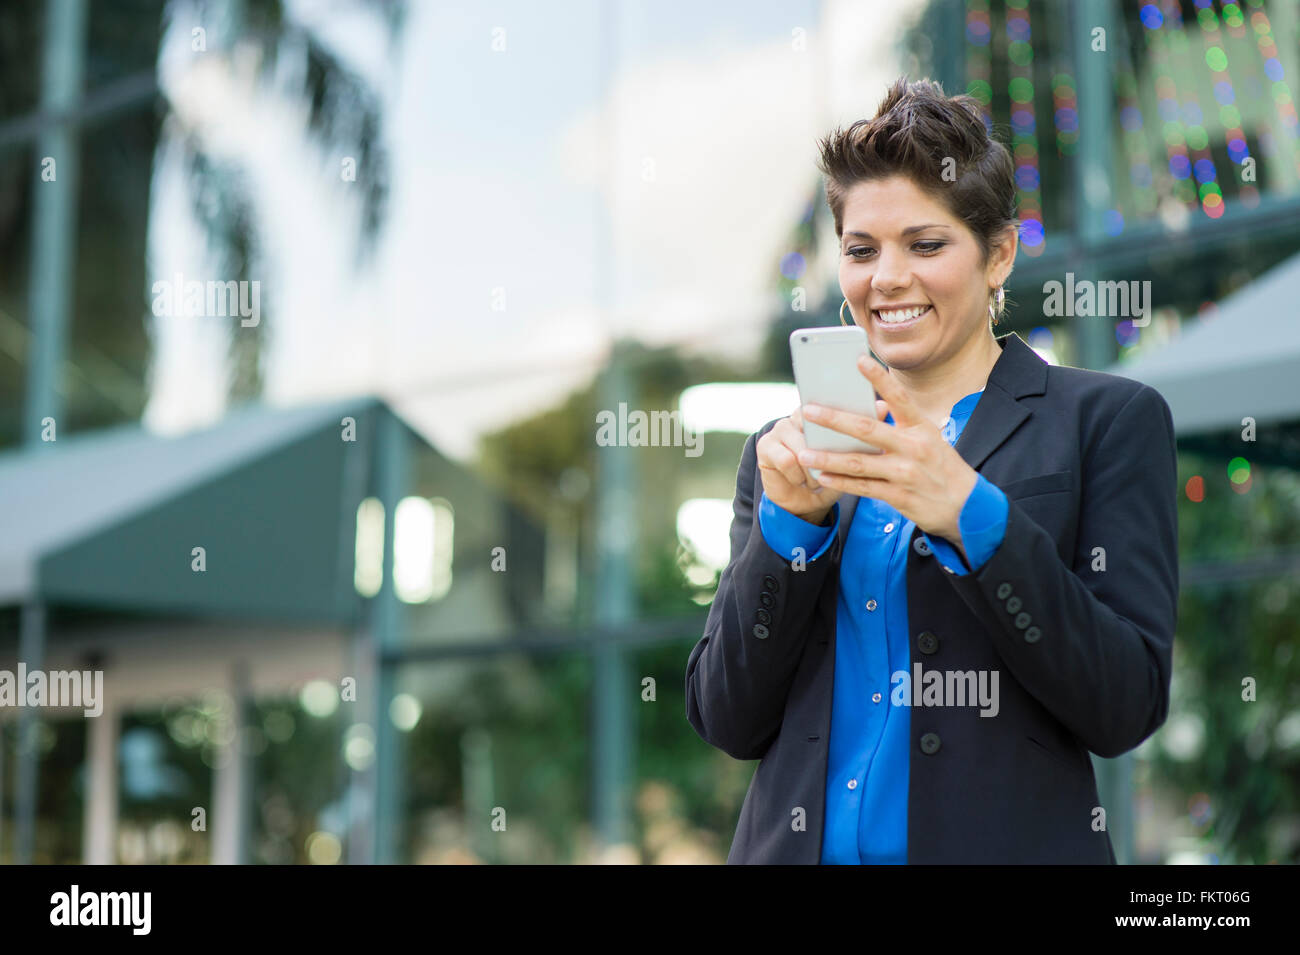 Caucasian businesswoman using cell phone outdoors Stock Photo